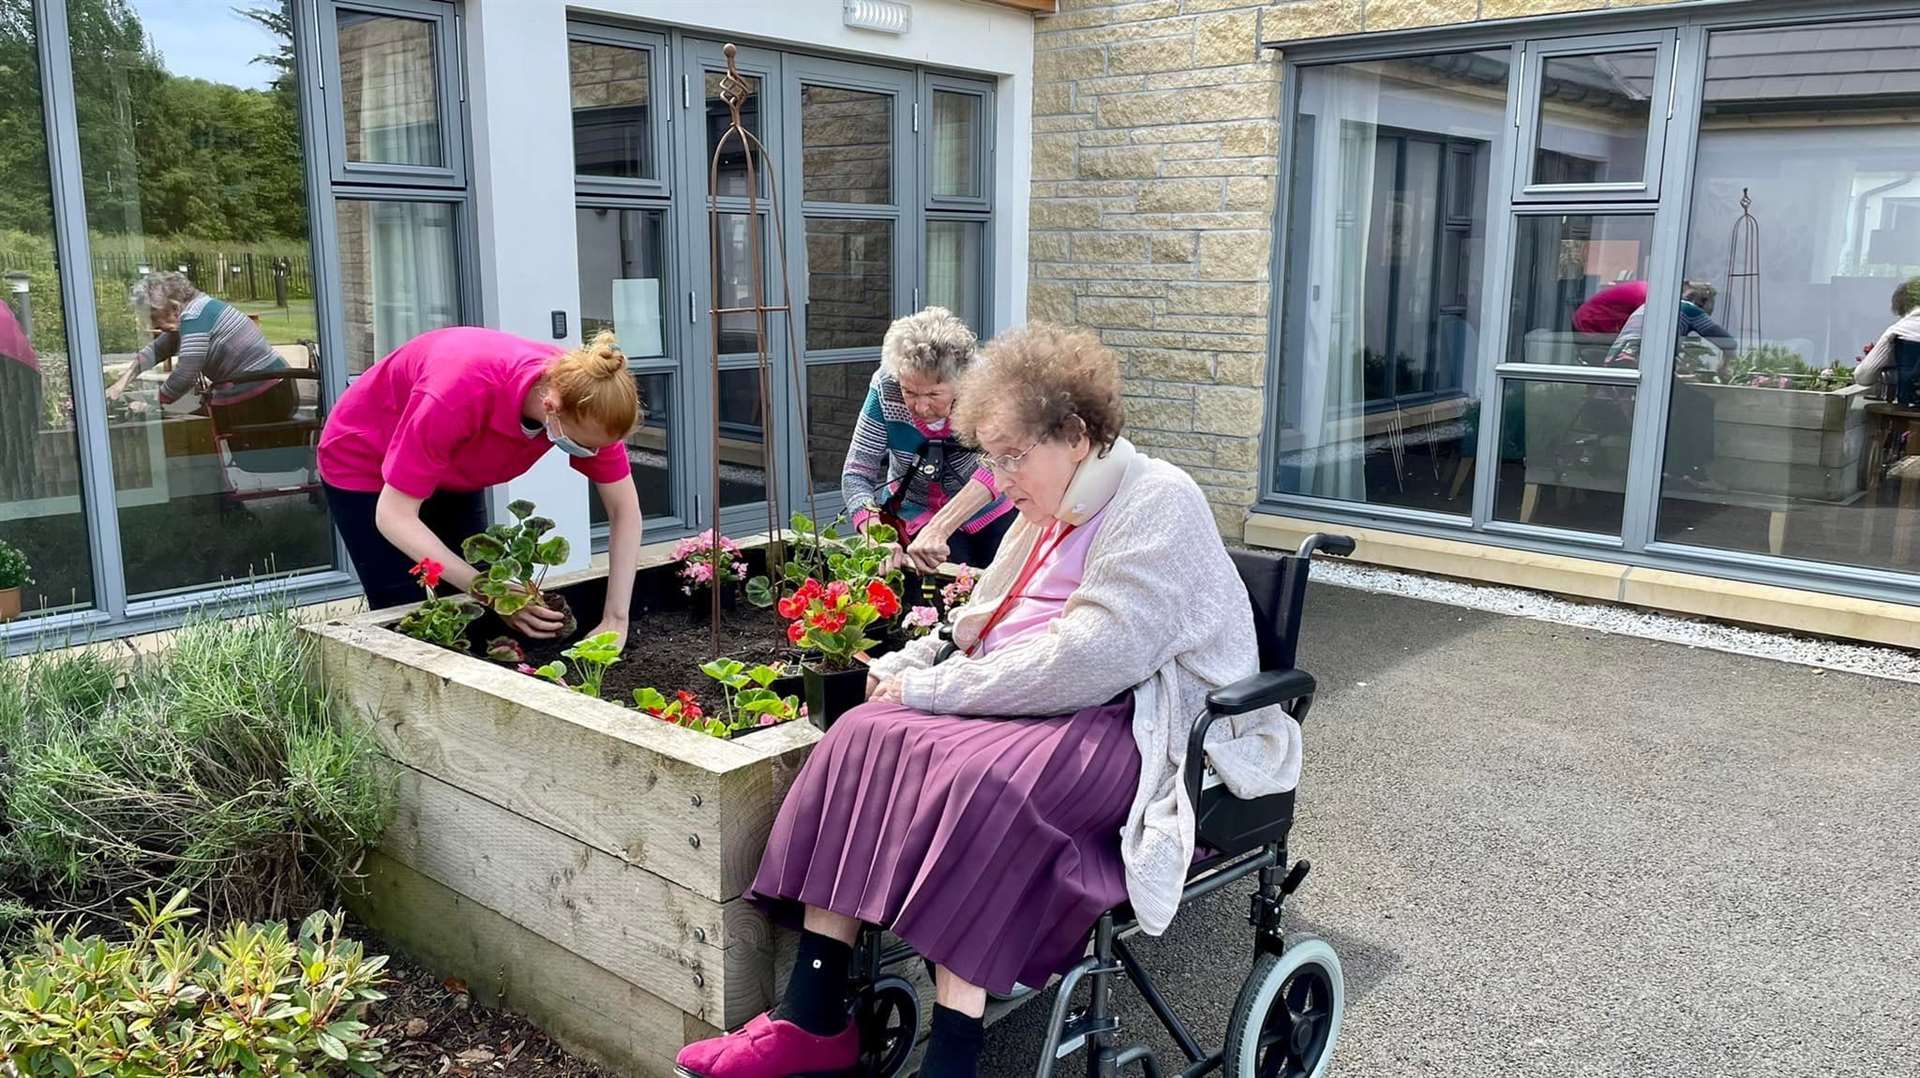 Residents and staff planting some of their donated flowers.